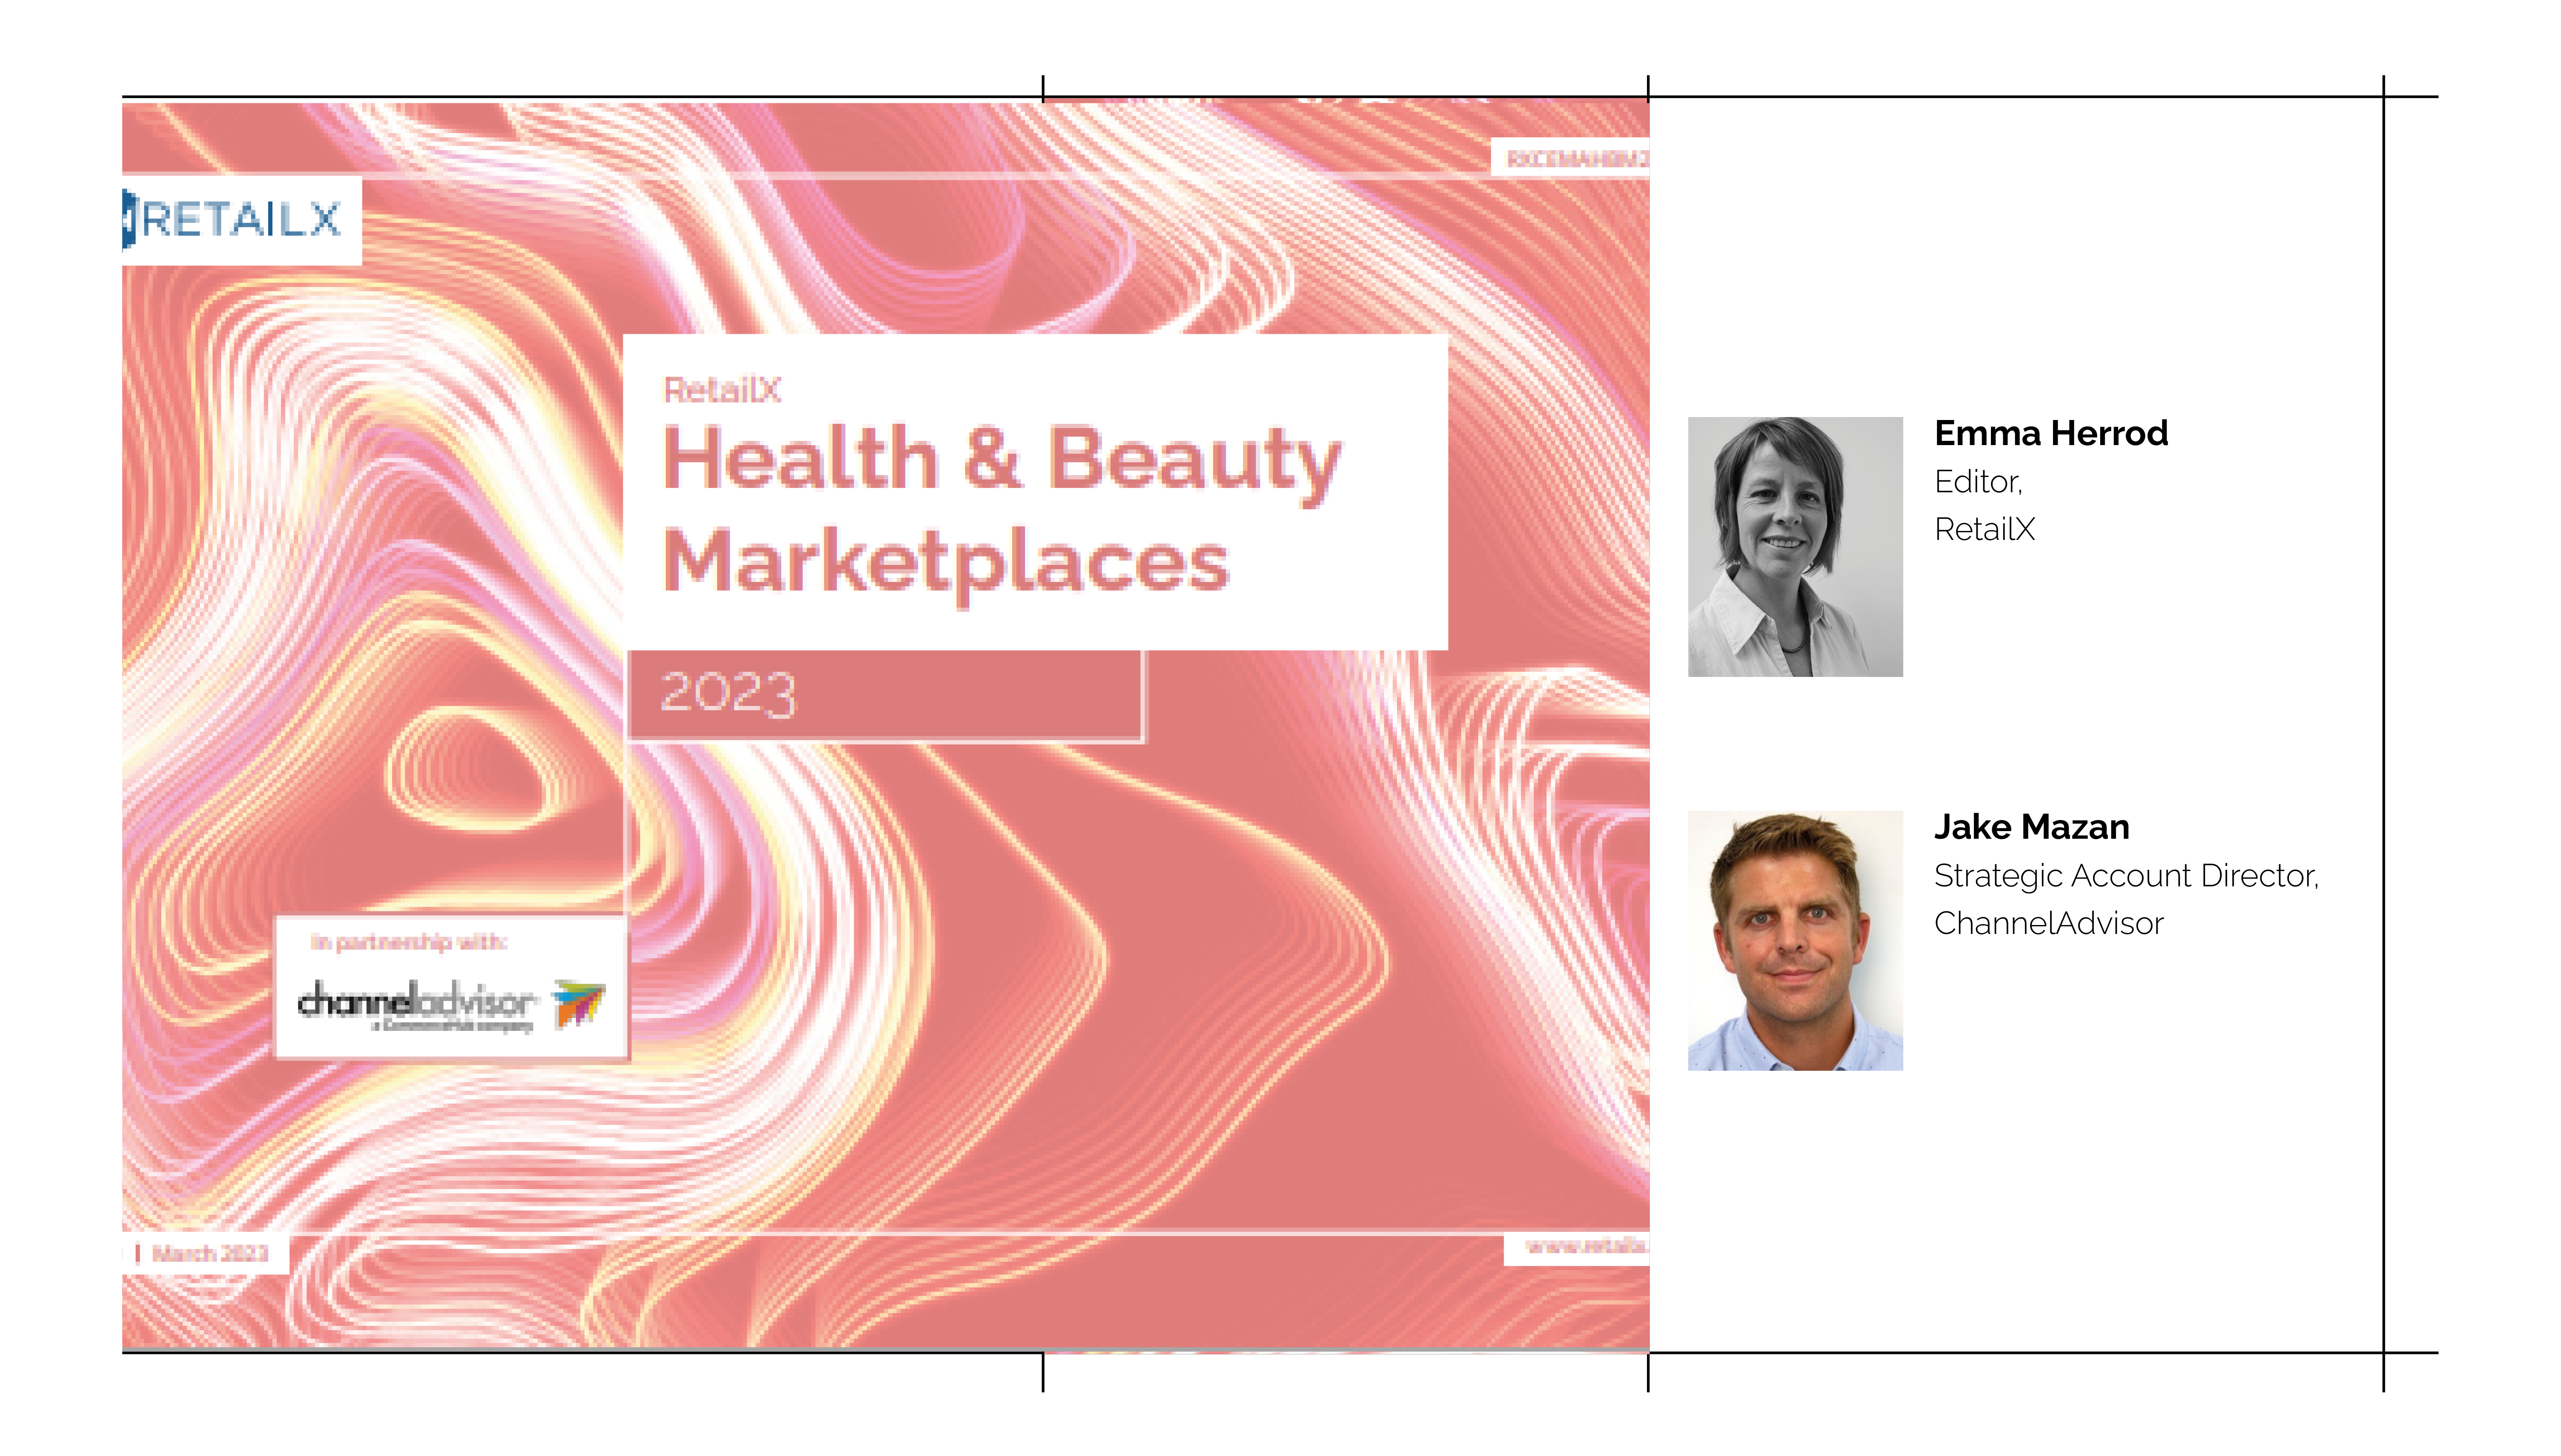 [Slide decks] Ecommerce world review_2023_ Analysing Health and Beauty Marketplaces - H&B marketplaces 2023 ir